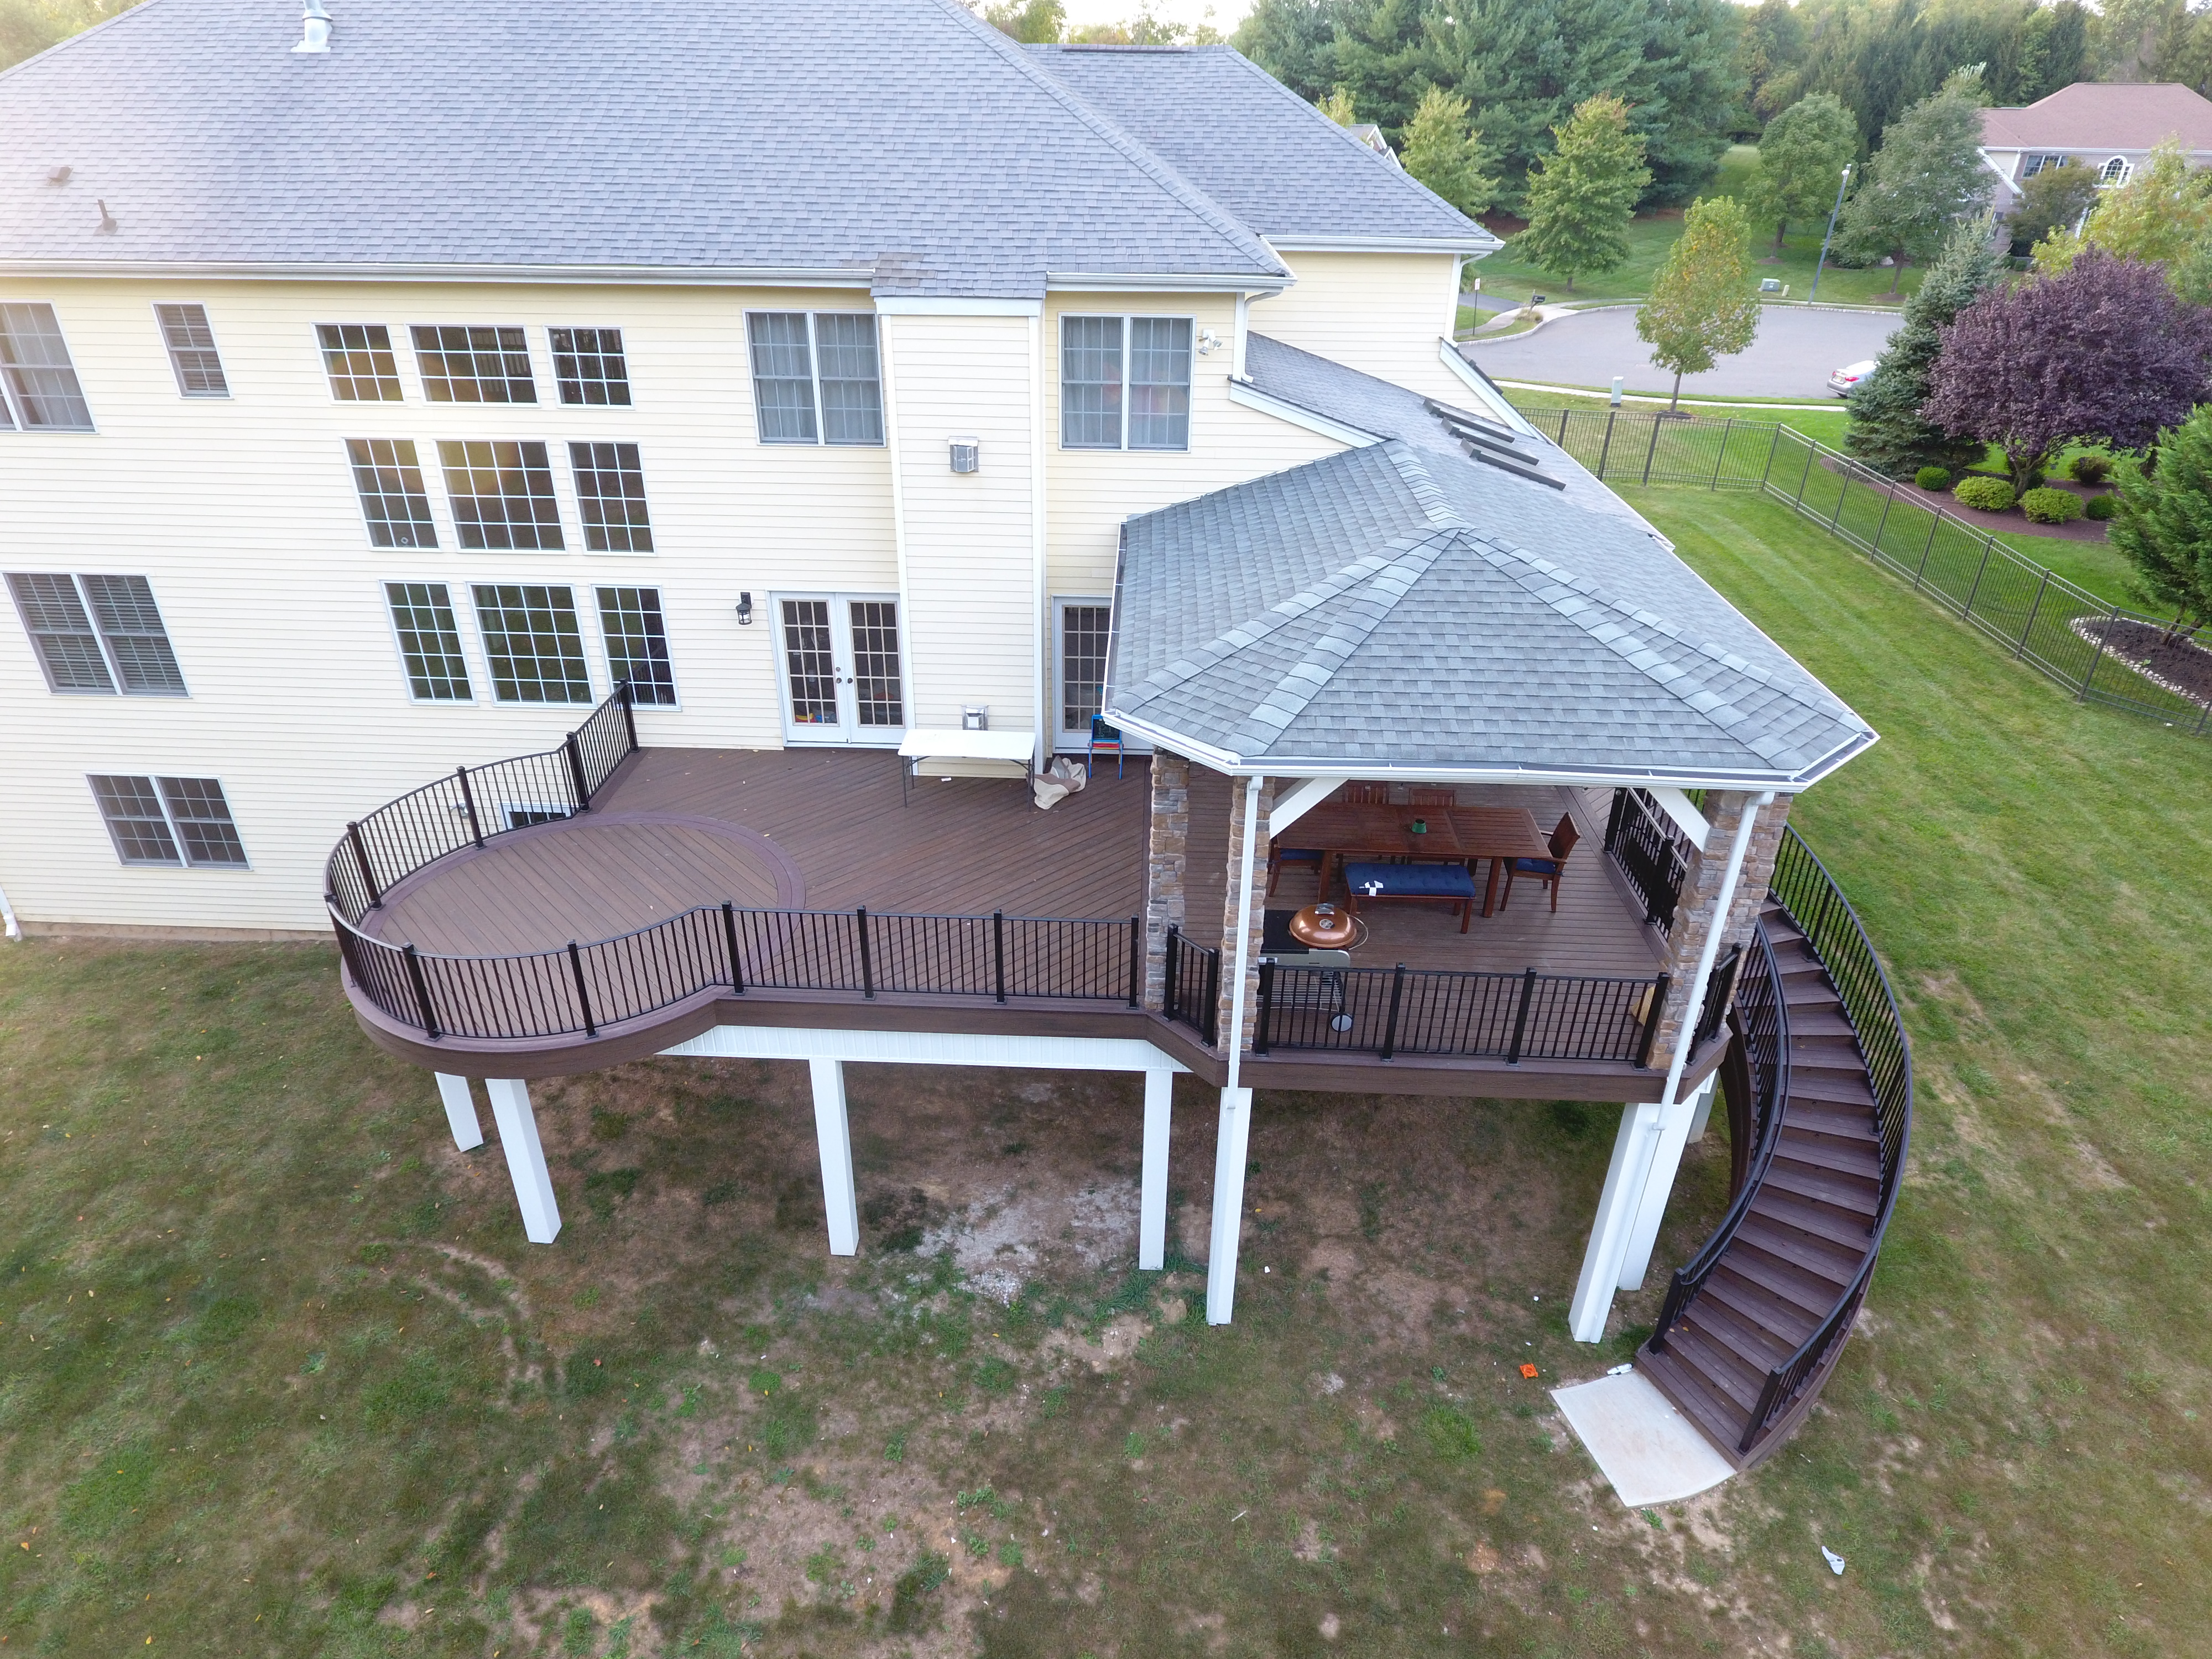 State of the Art Trex Deck, Curved Stairs, Hip-Roof